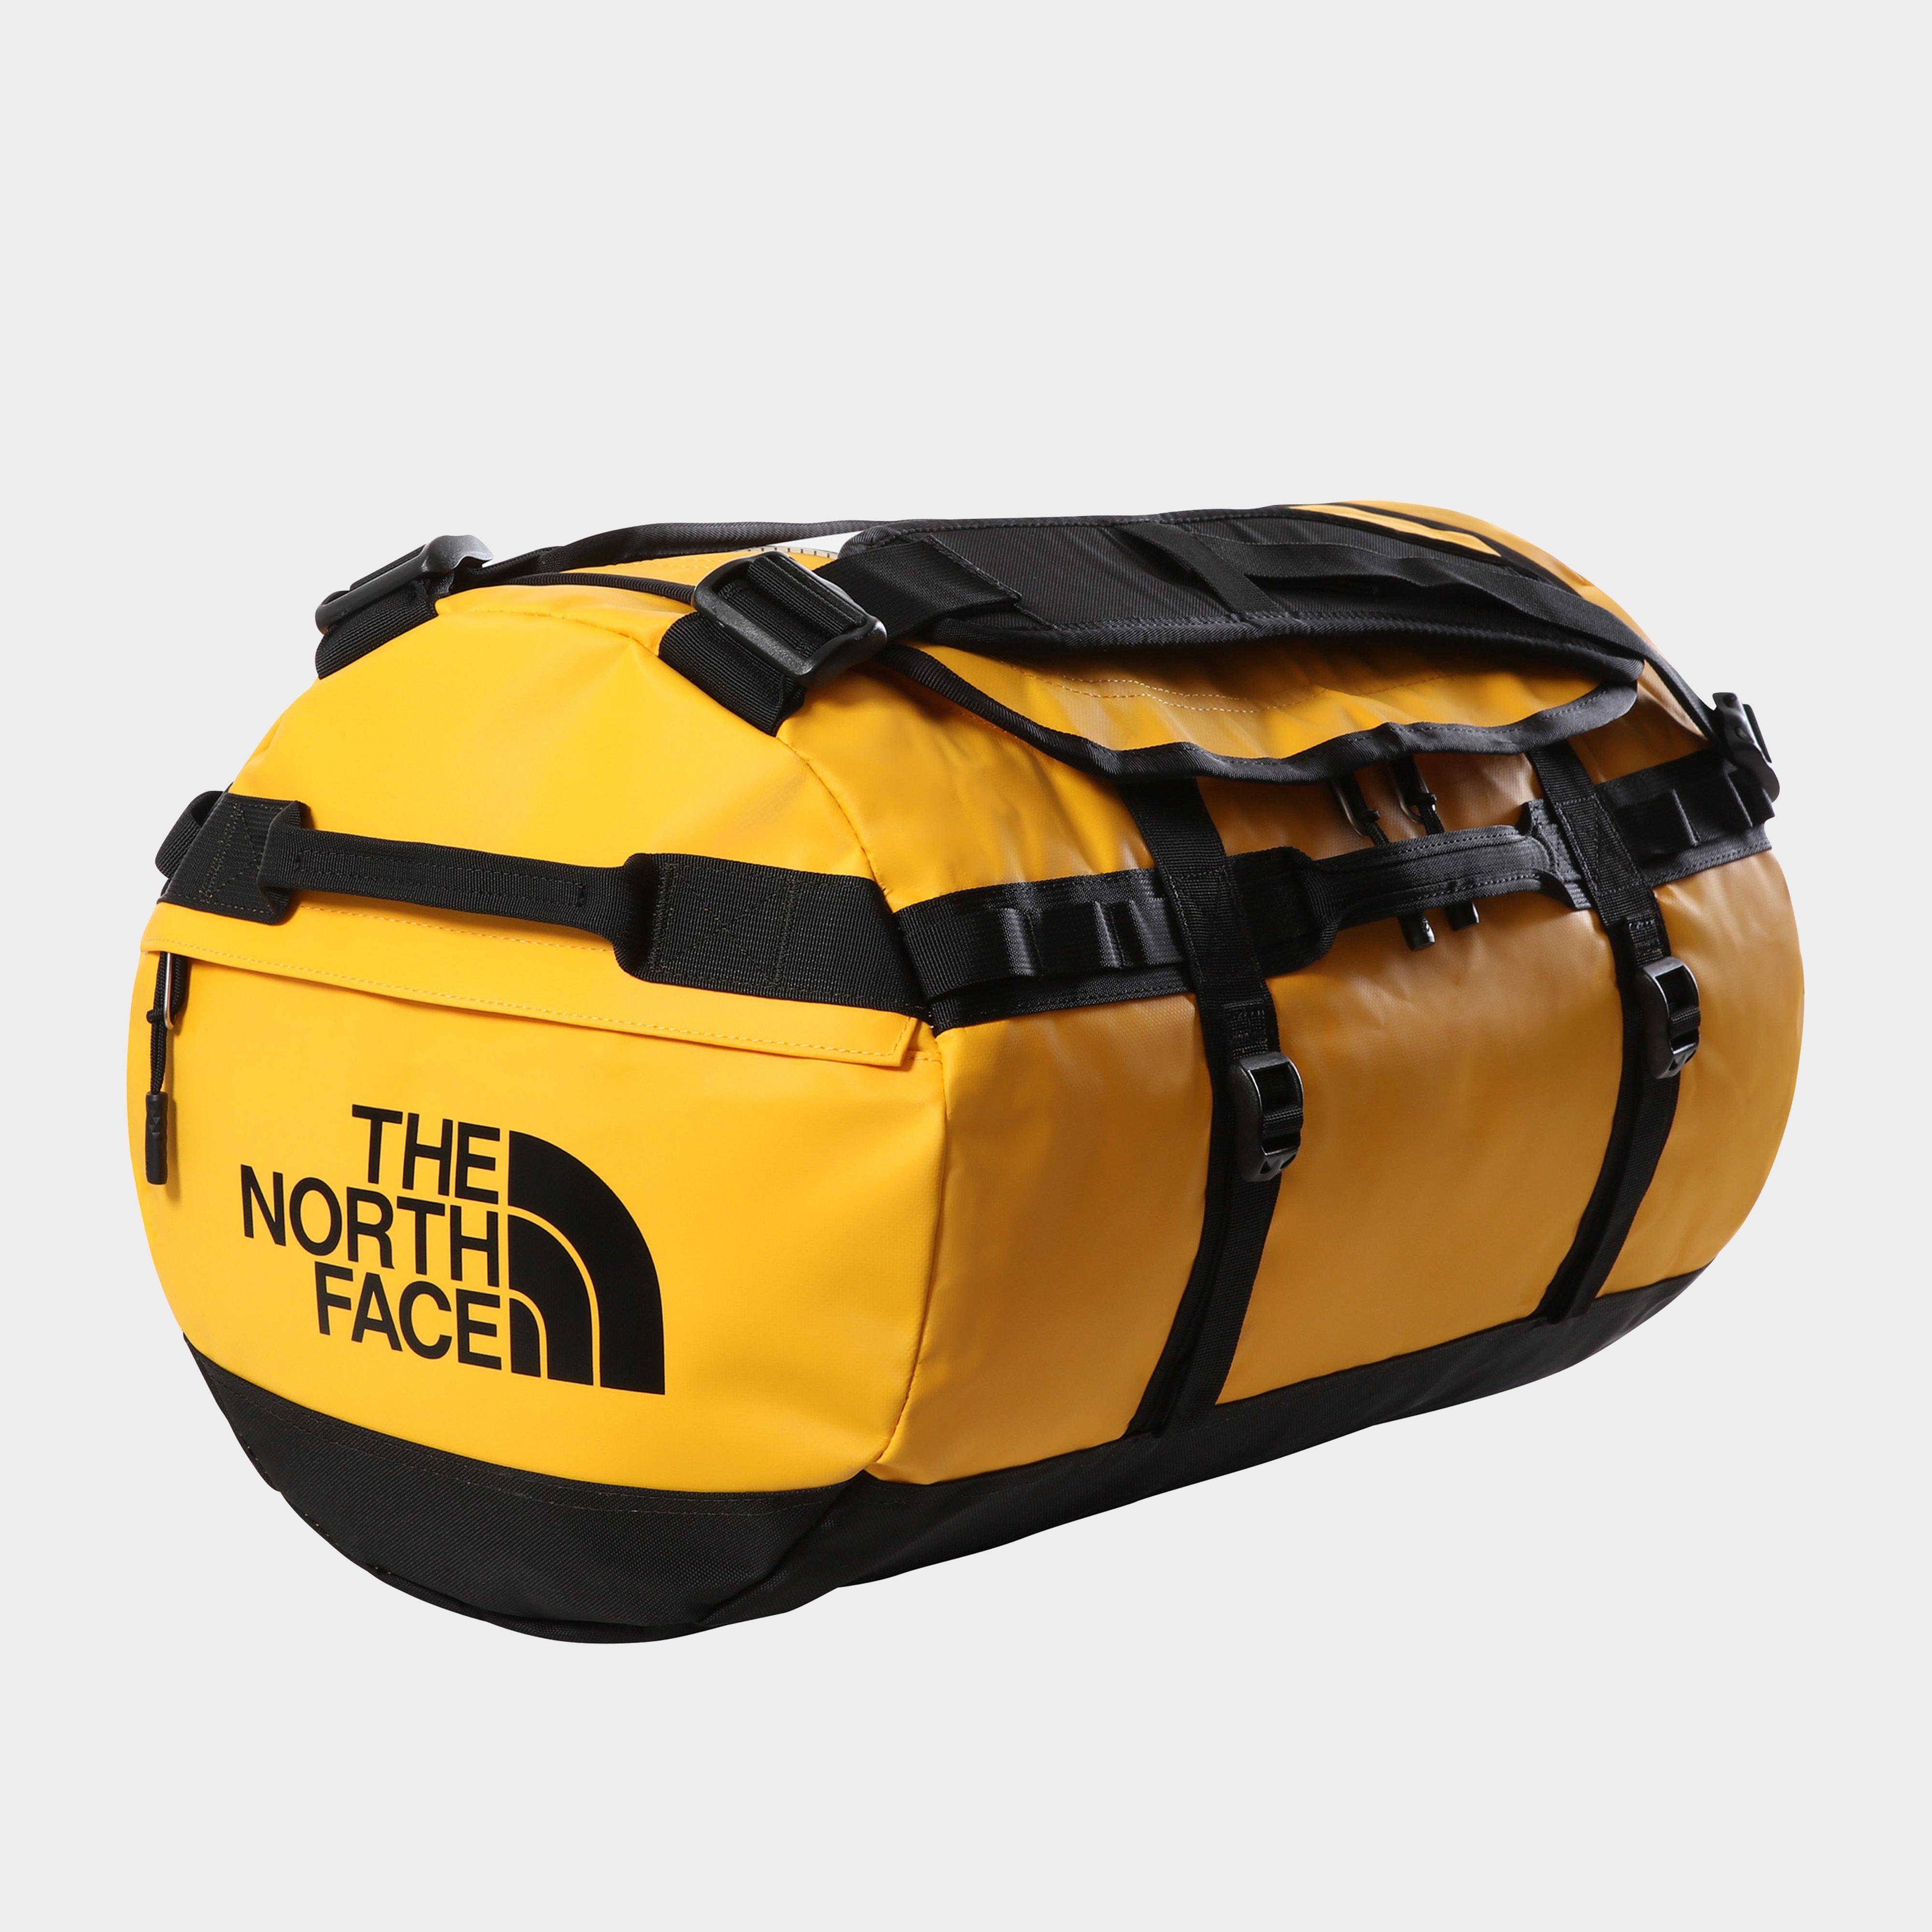 The North Face Base Camp Duffel Bag (small) - Gold/black  Gold/black